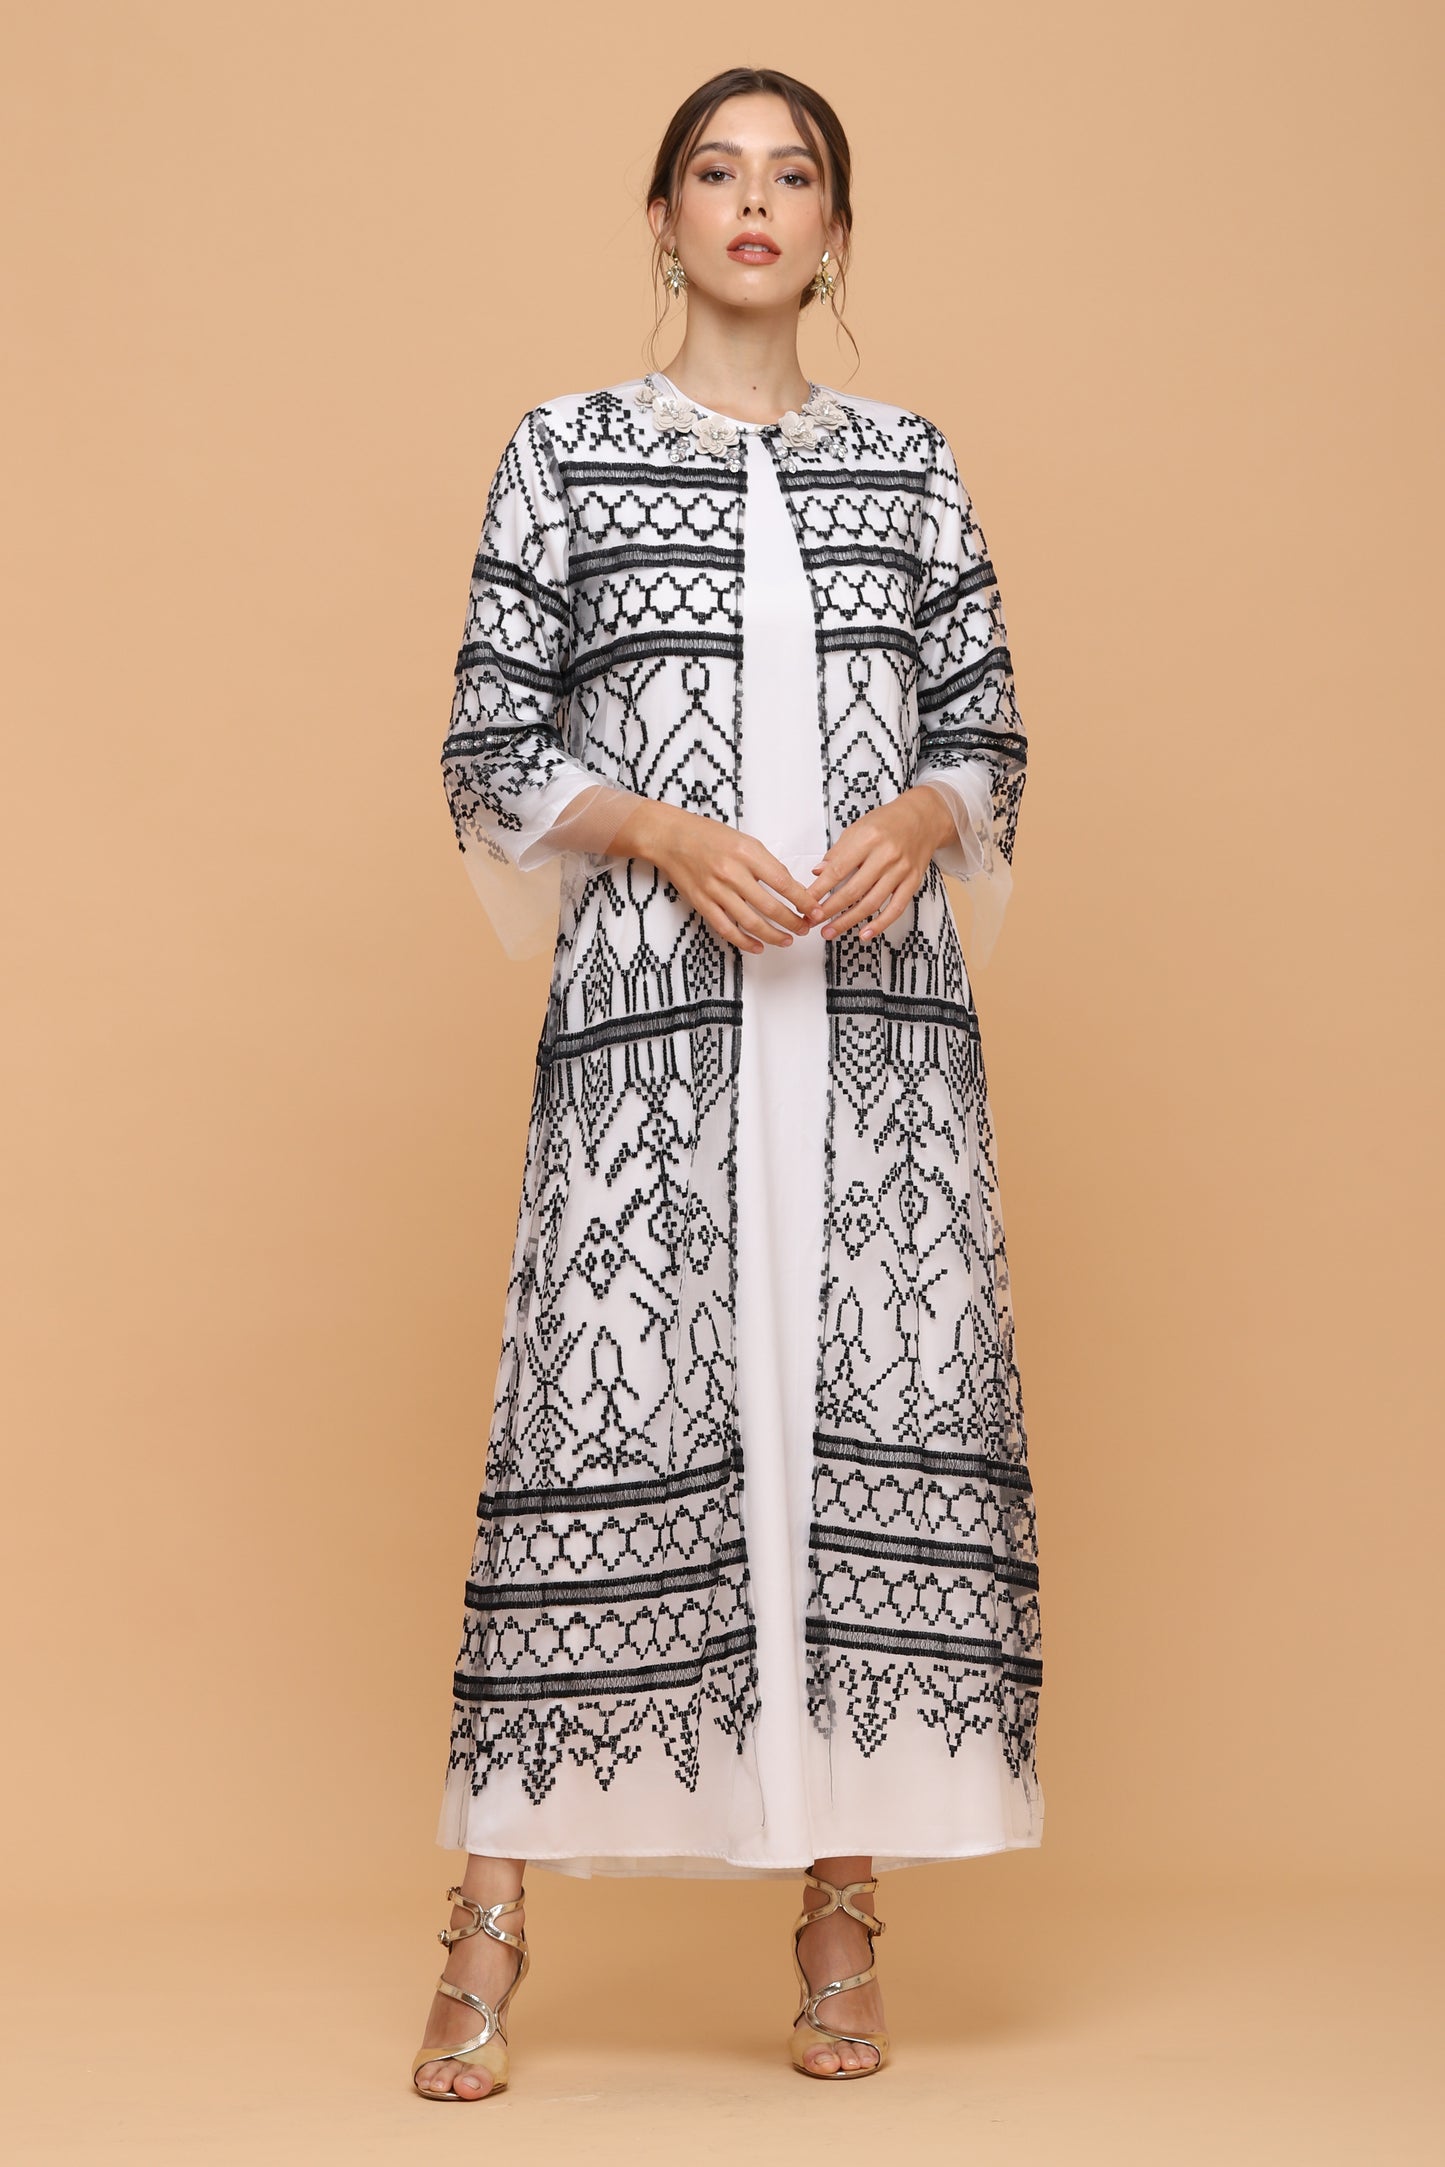 Loyal - Black and White Ethnic Outerwear (Inner Included)